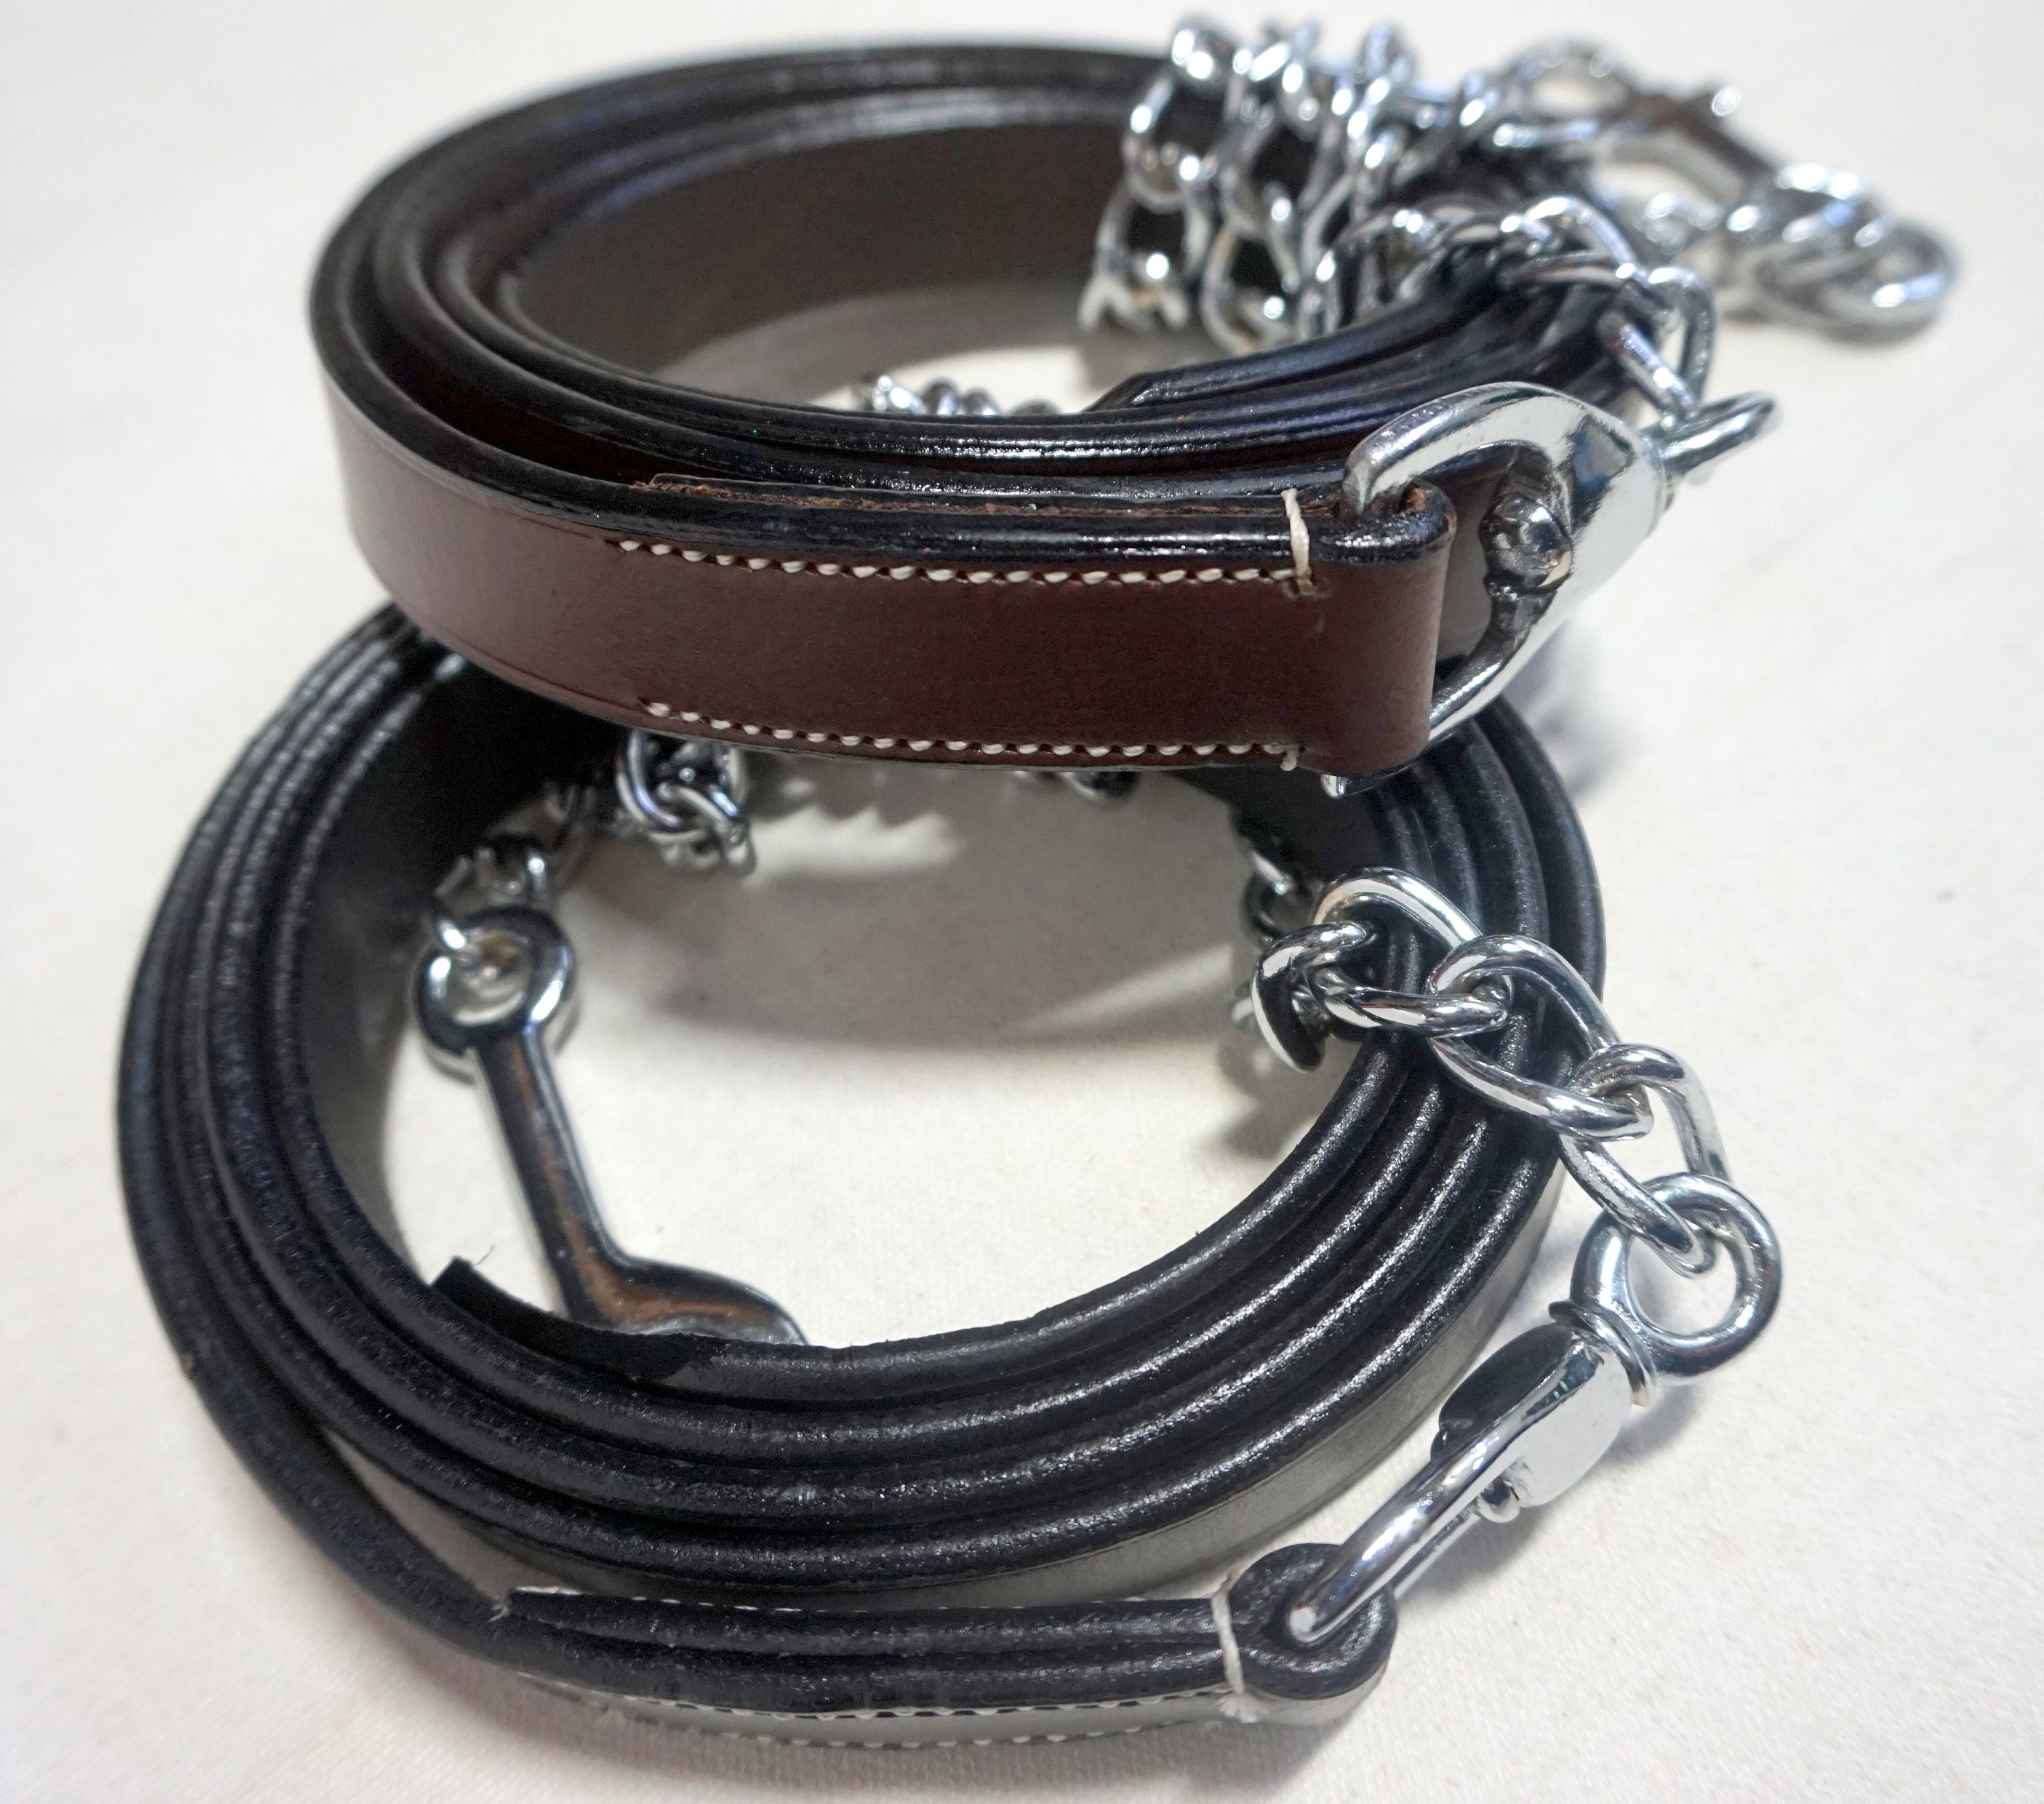 Leather Lead Rope with Custom Engraved Plate - Made in the USA